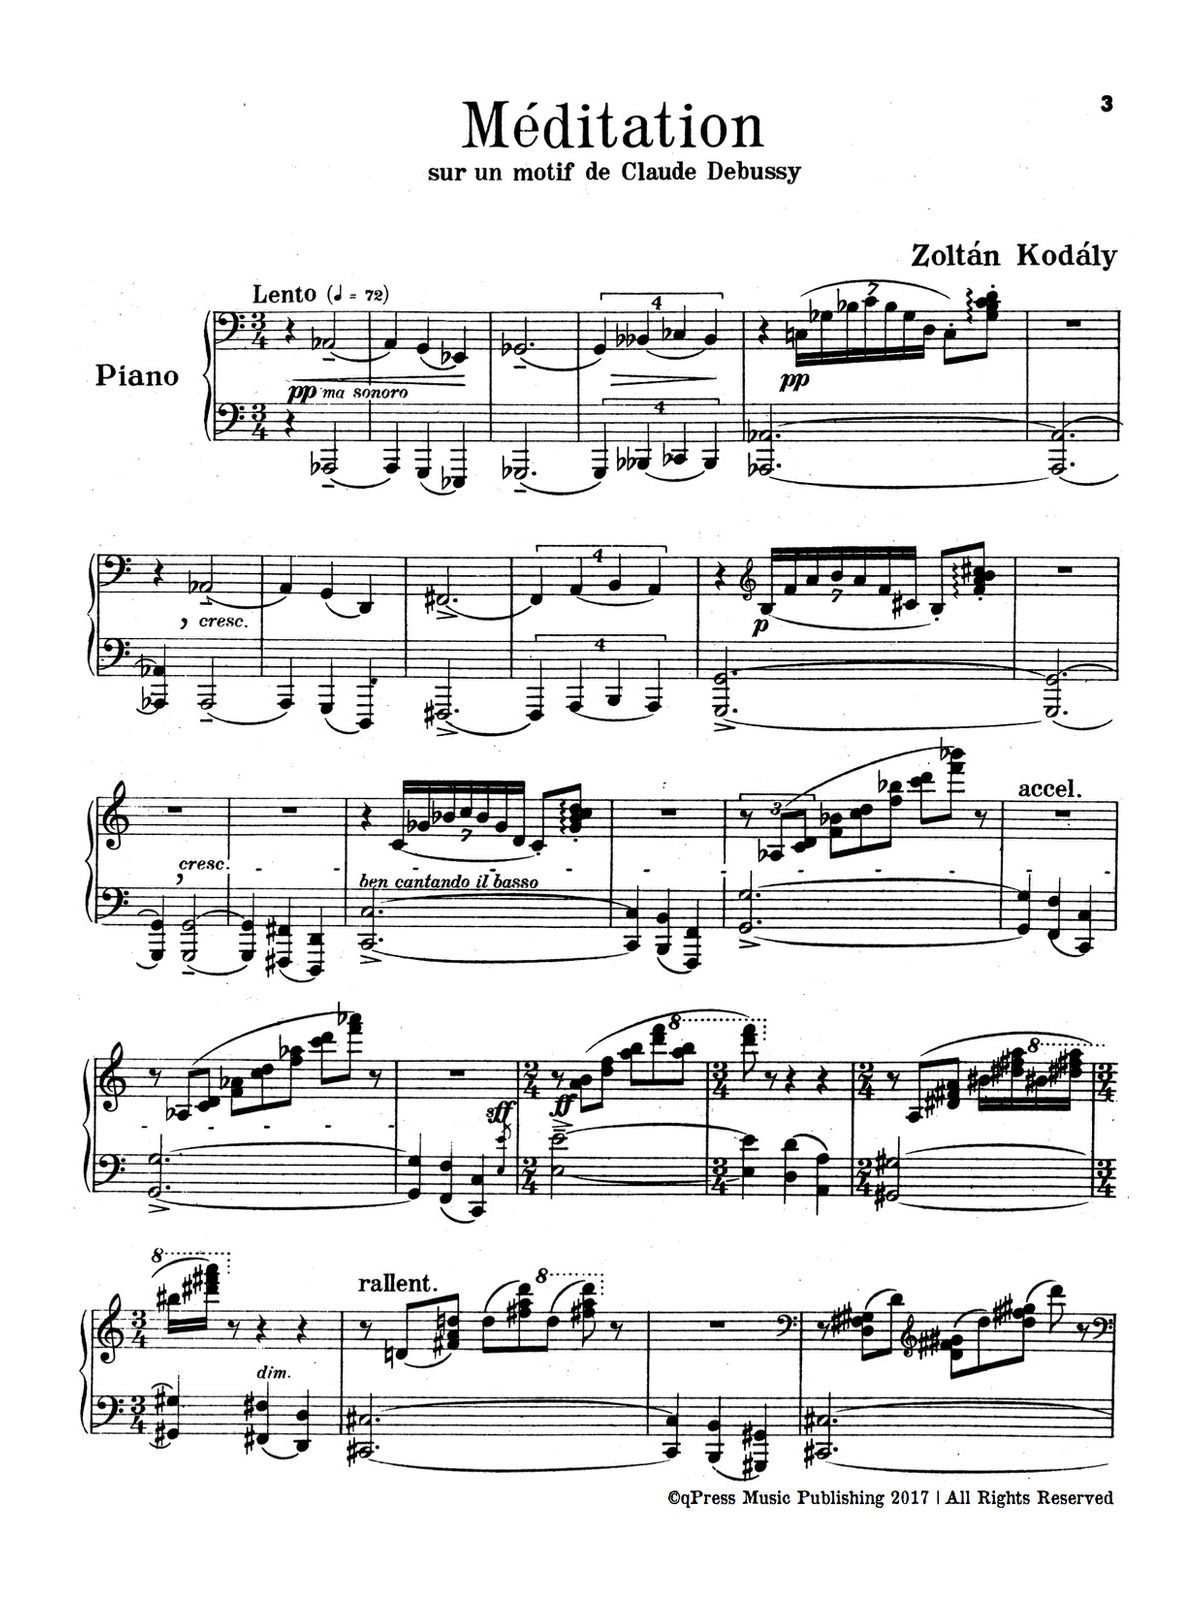 Kodály, Meditation on a Theme By Claude Debussy-p3